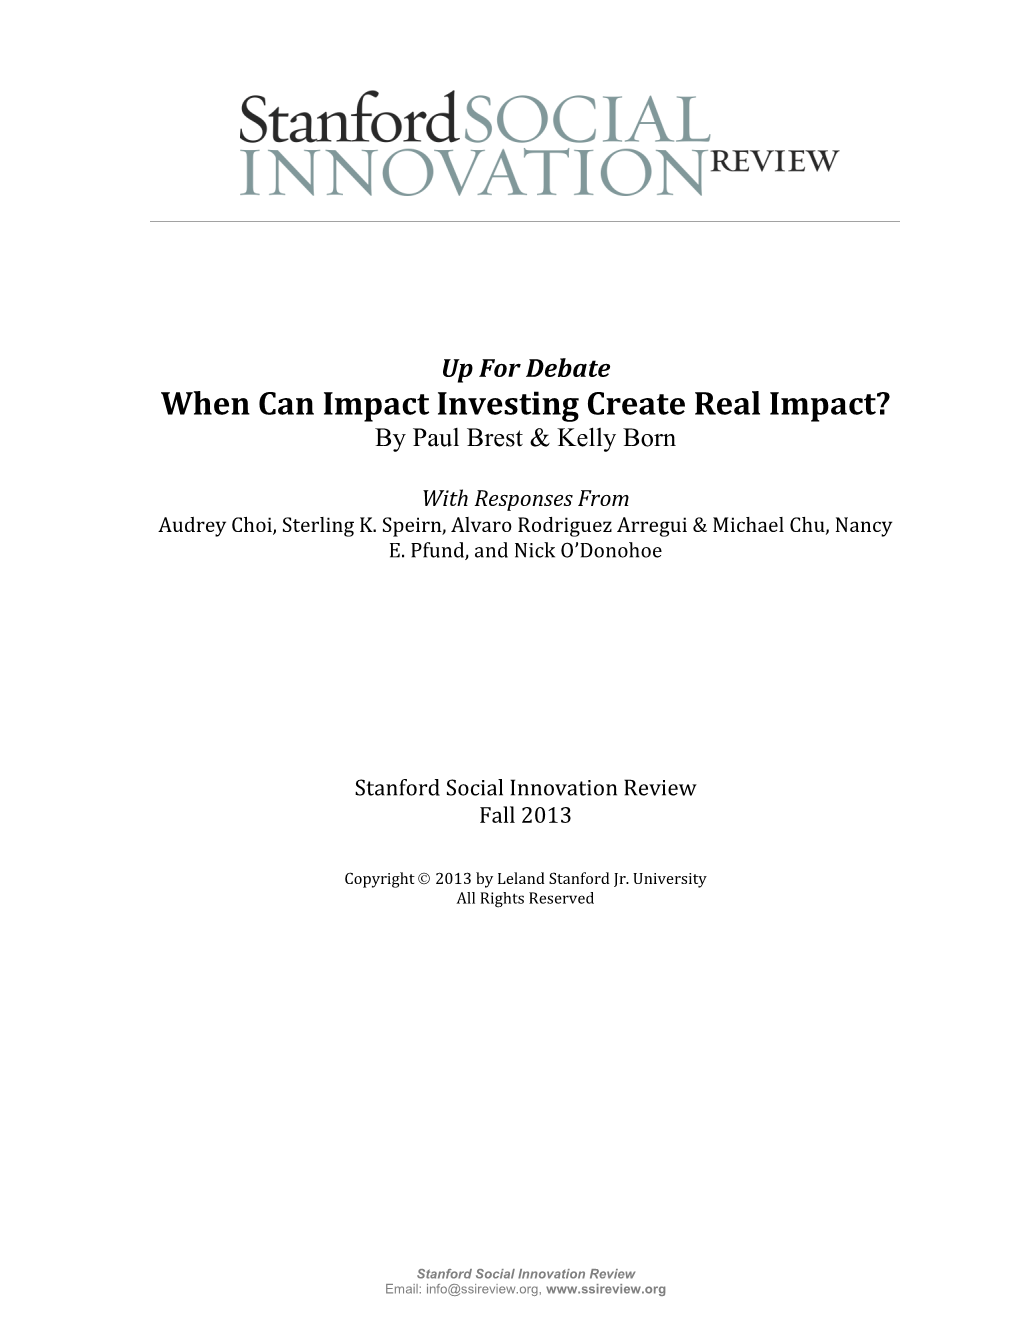 When Can Impact Investing Create Real Impact? by Paul Brest & Kelly Born